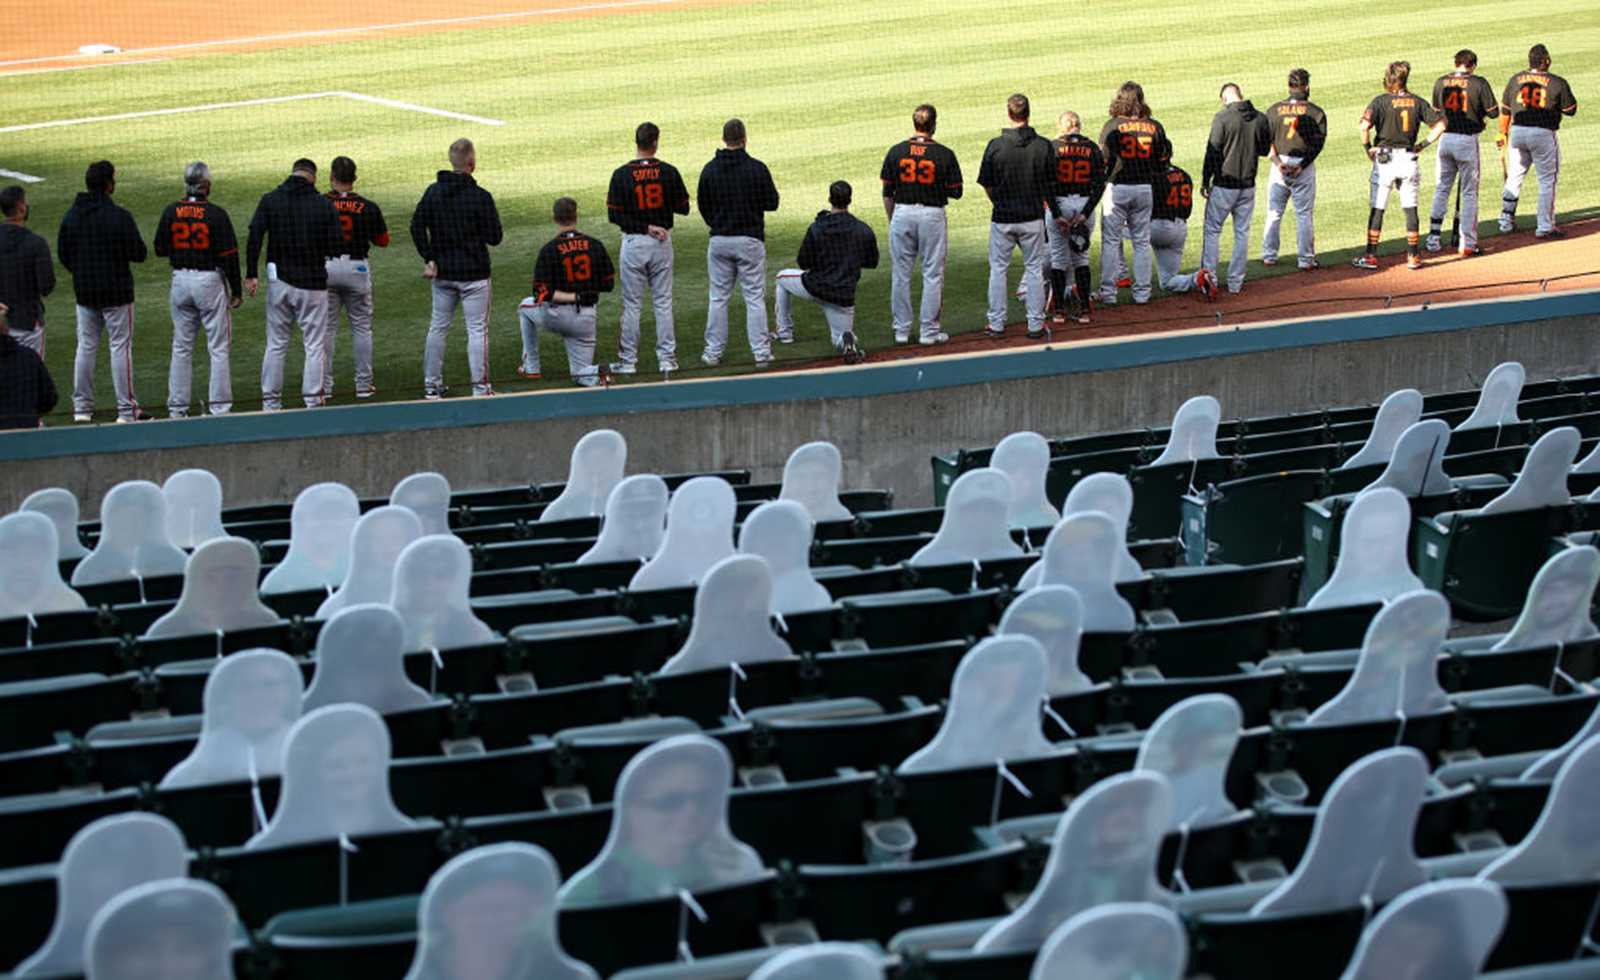 Austin Slater #13 and Jaylin Davis #49 of the San Francisco Giants kneel during the National Anthem before their exhibition game against the Oakland Athletics at Oakland-Alameda County Coliseum on July 20, 2020 in Oakland, California. (Photo by Ezra Shaw/Getty Images/TNS)